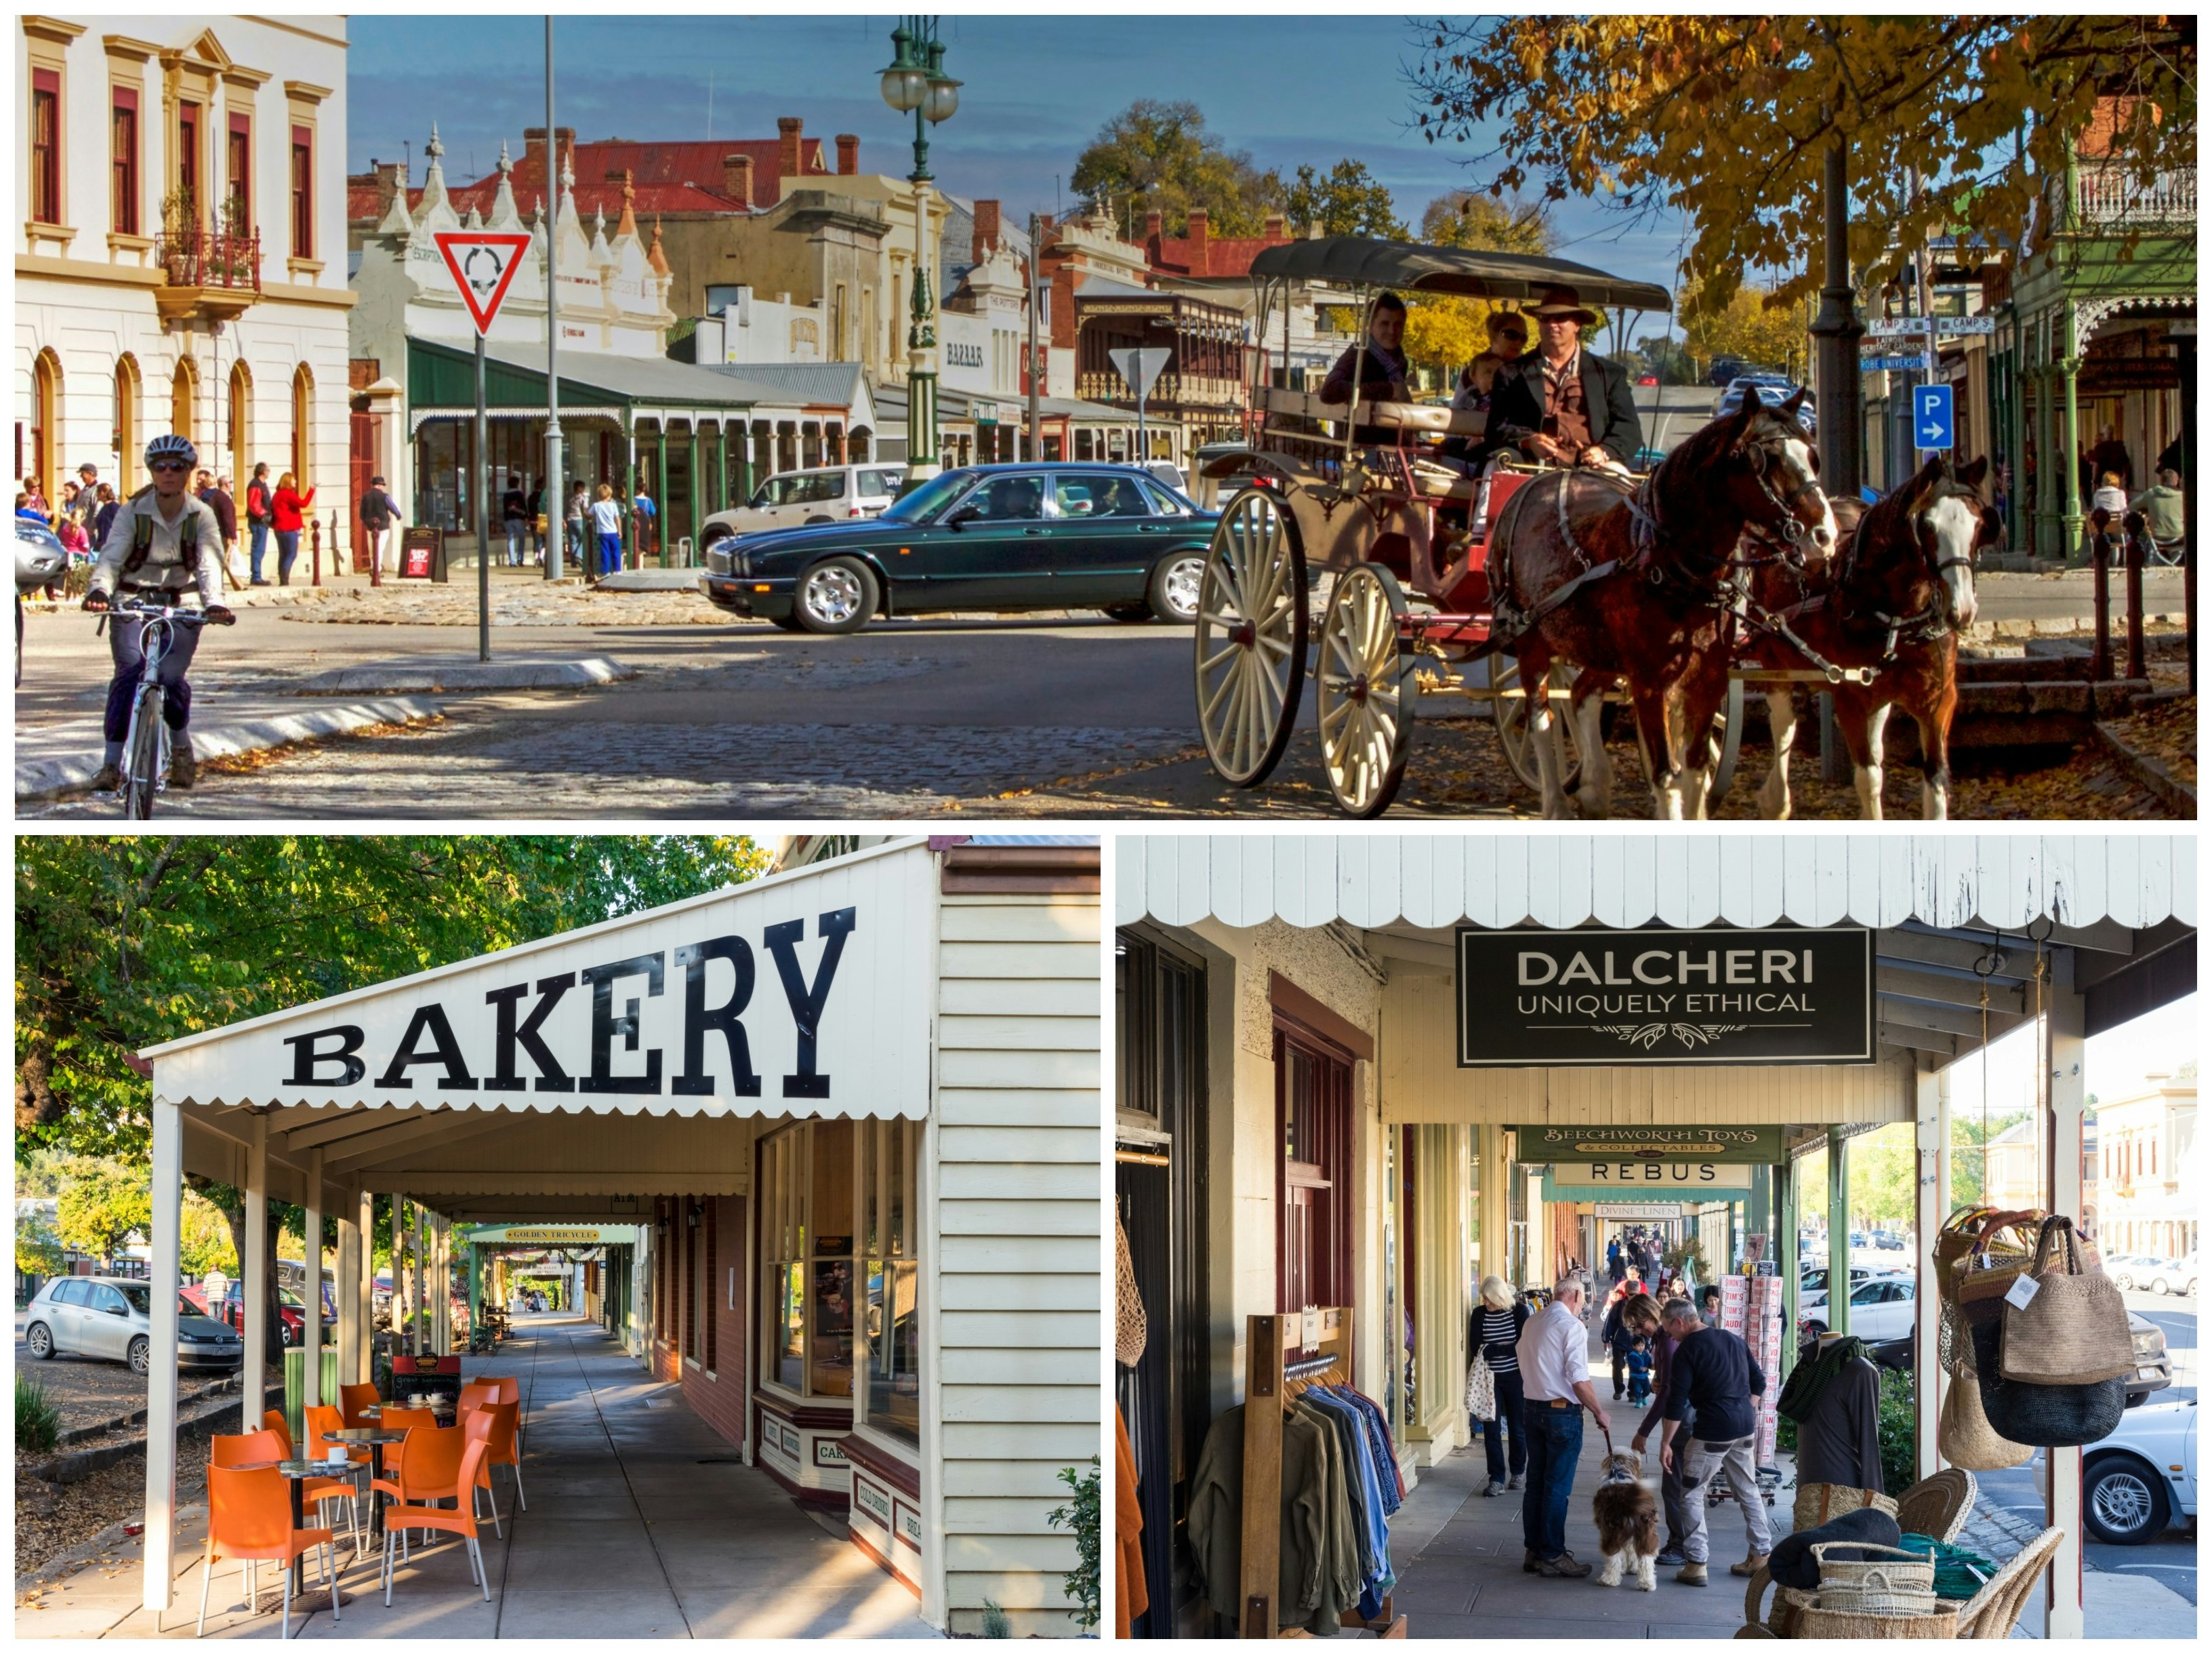 Shots of Beechworth village, incl. a horse-drawn carriage on main street, a bakery and vintage clothes for sale outside a shop